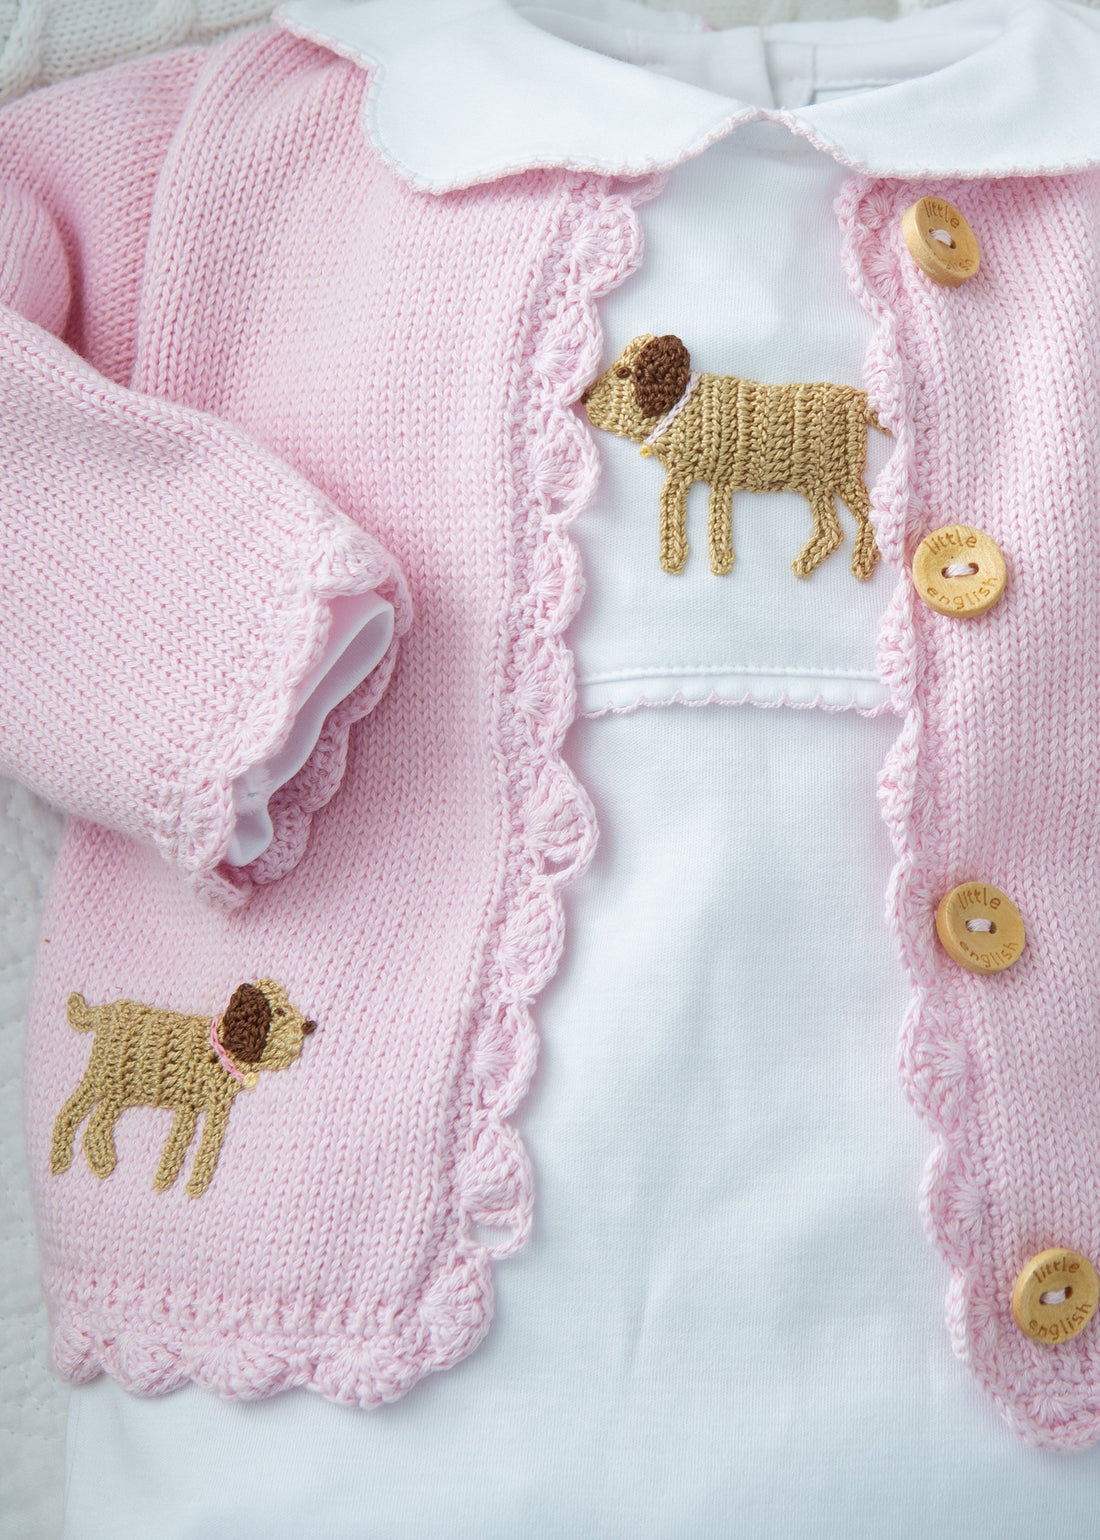 Little English traditional crochet sweater, pink lab crochet sweater for baby girl